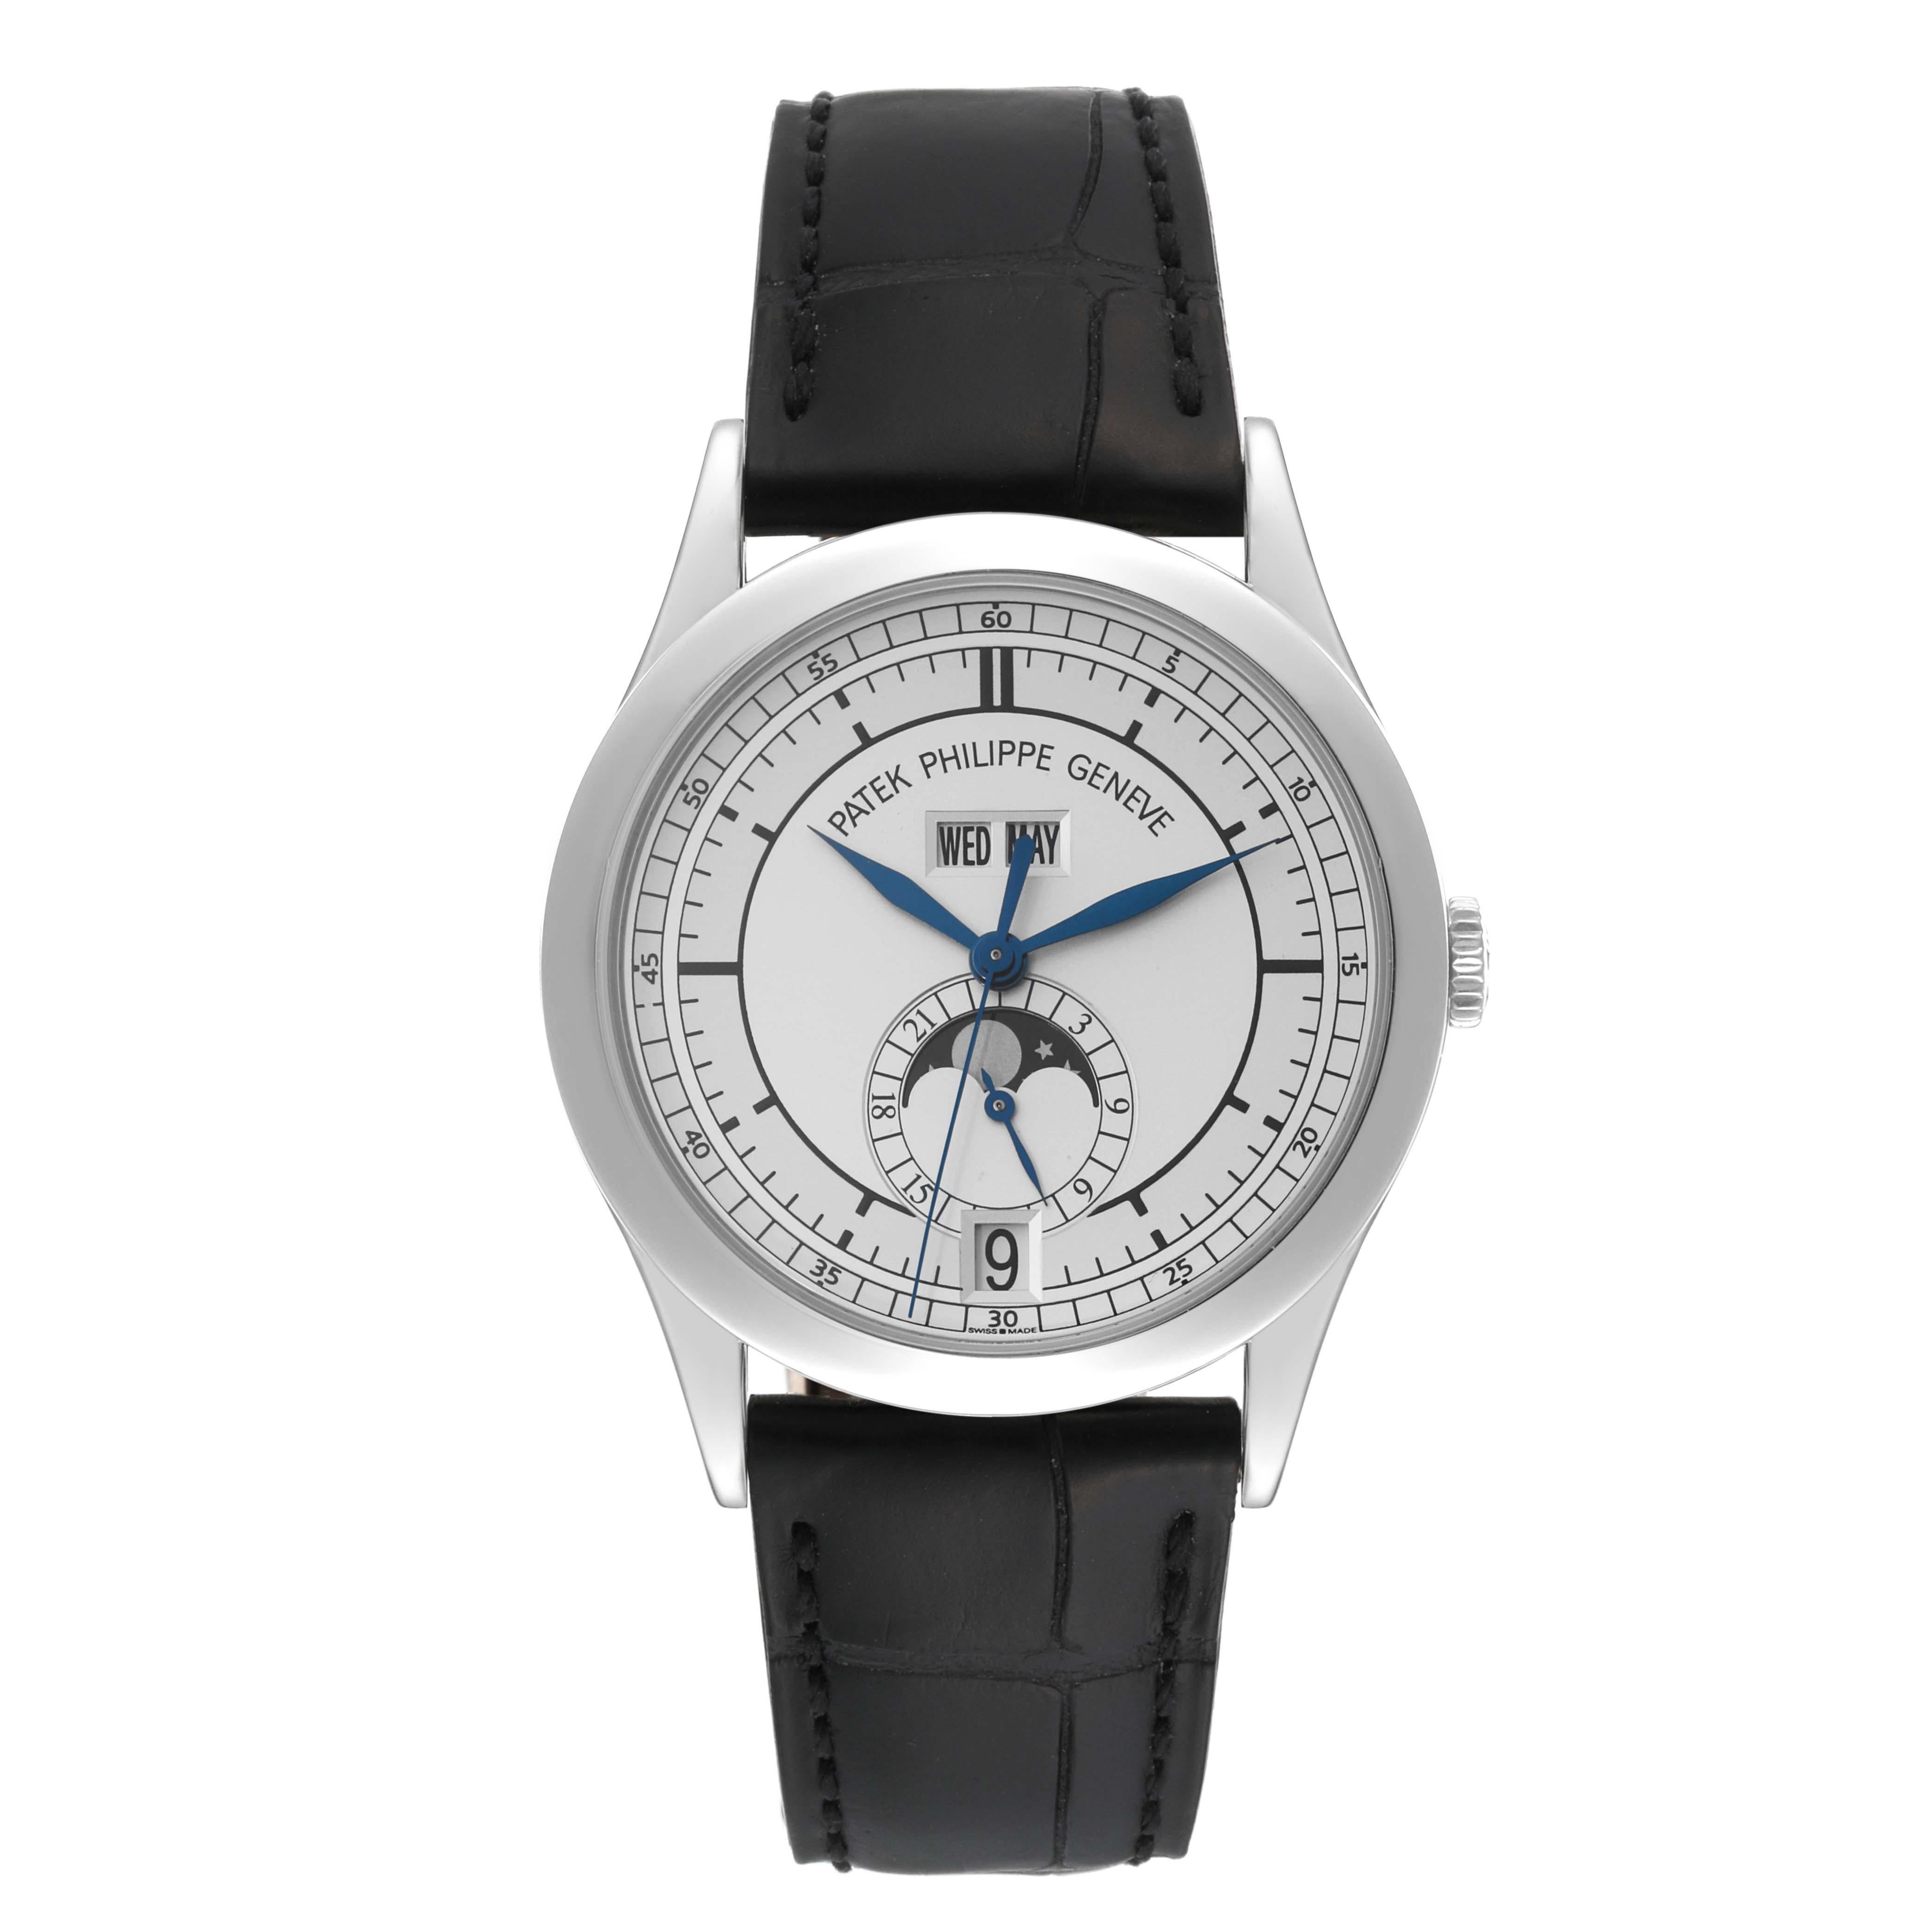 Patek Philippe Complications Annual Calendar White Gold Mens Watch 5396. Automatic self-winding movement. 18k white gold case 39.0 mm in diameter. Exhibition transparent sapphire crystal case back. 18k white gold bezel. Scratch resistant sapphire